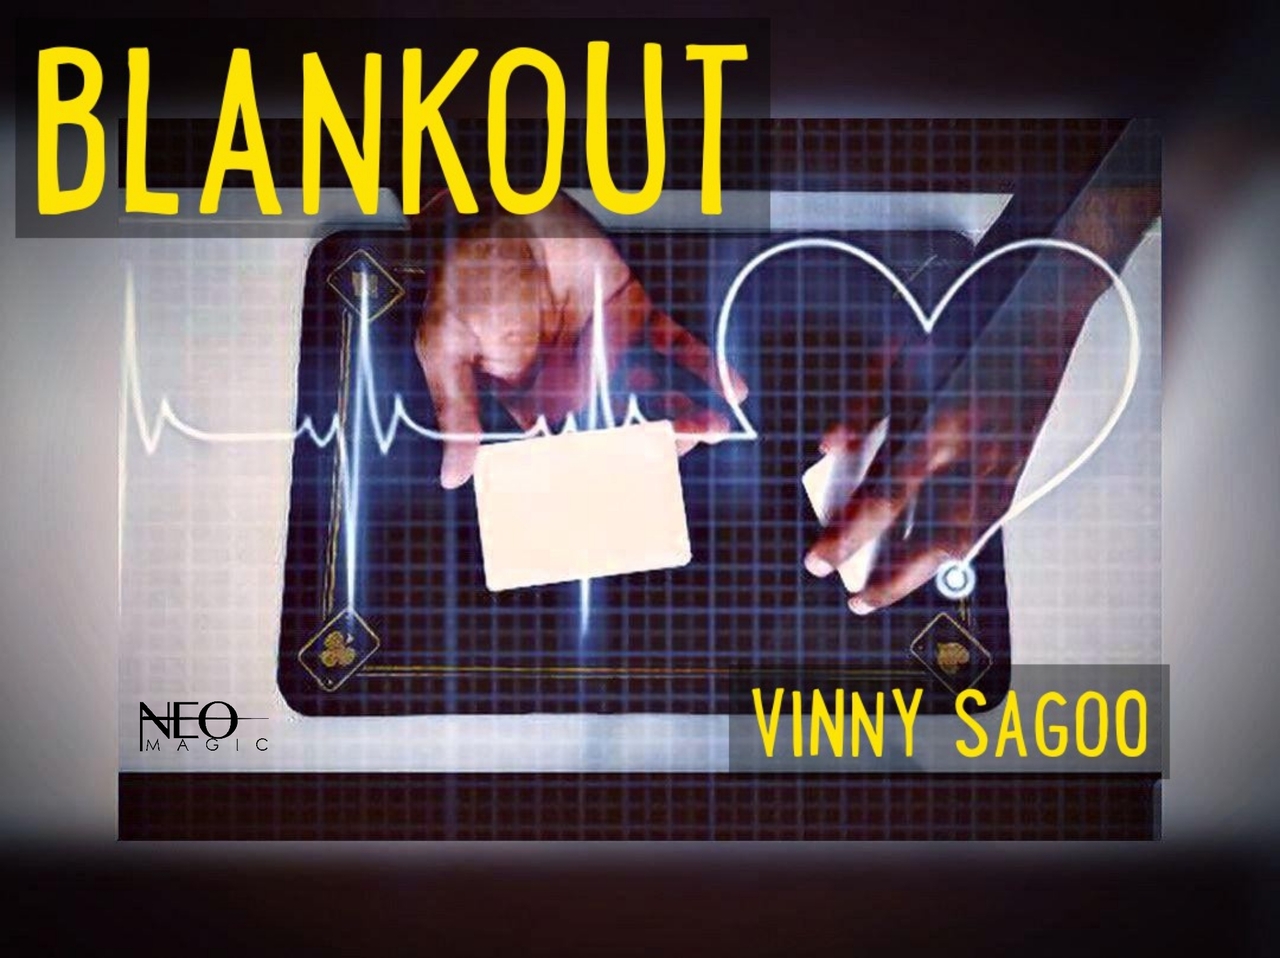 Blankout by Vinny Sagoo (Neo Magic) (MP4 Video Download)